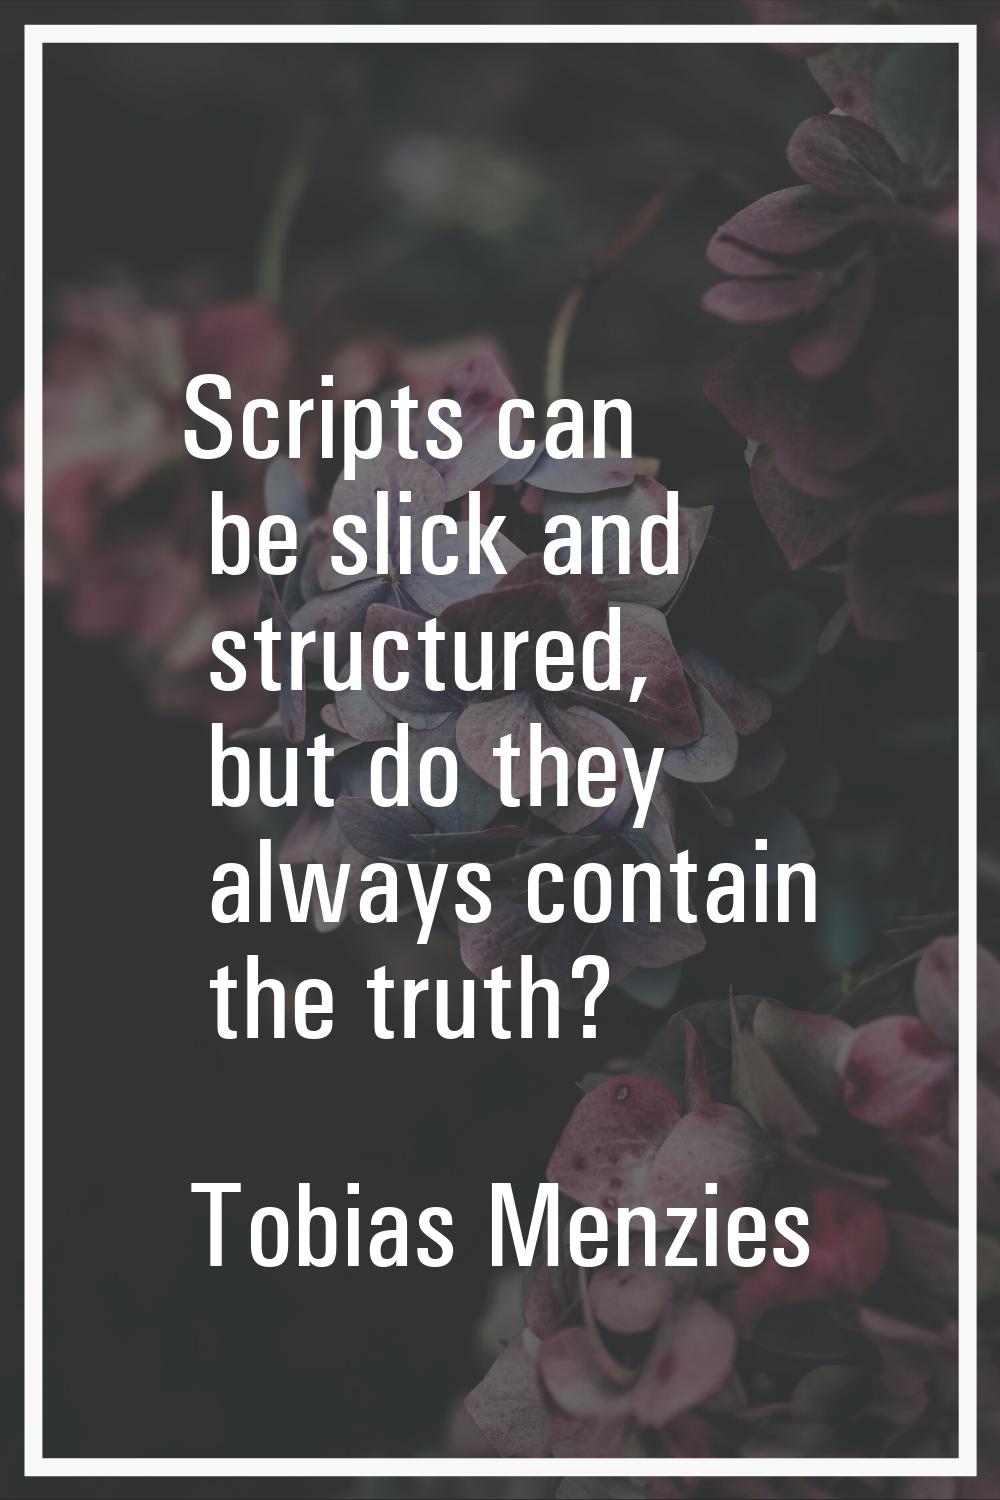 Scripts can be slick and structured, but do they always contain the truth?